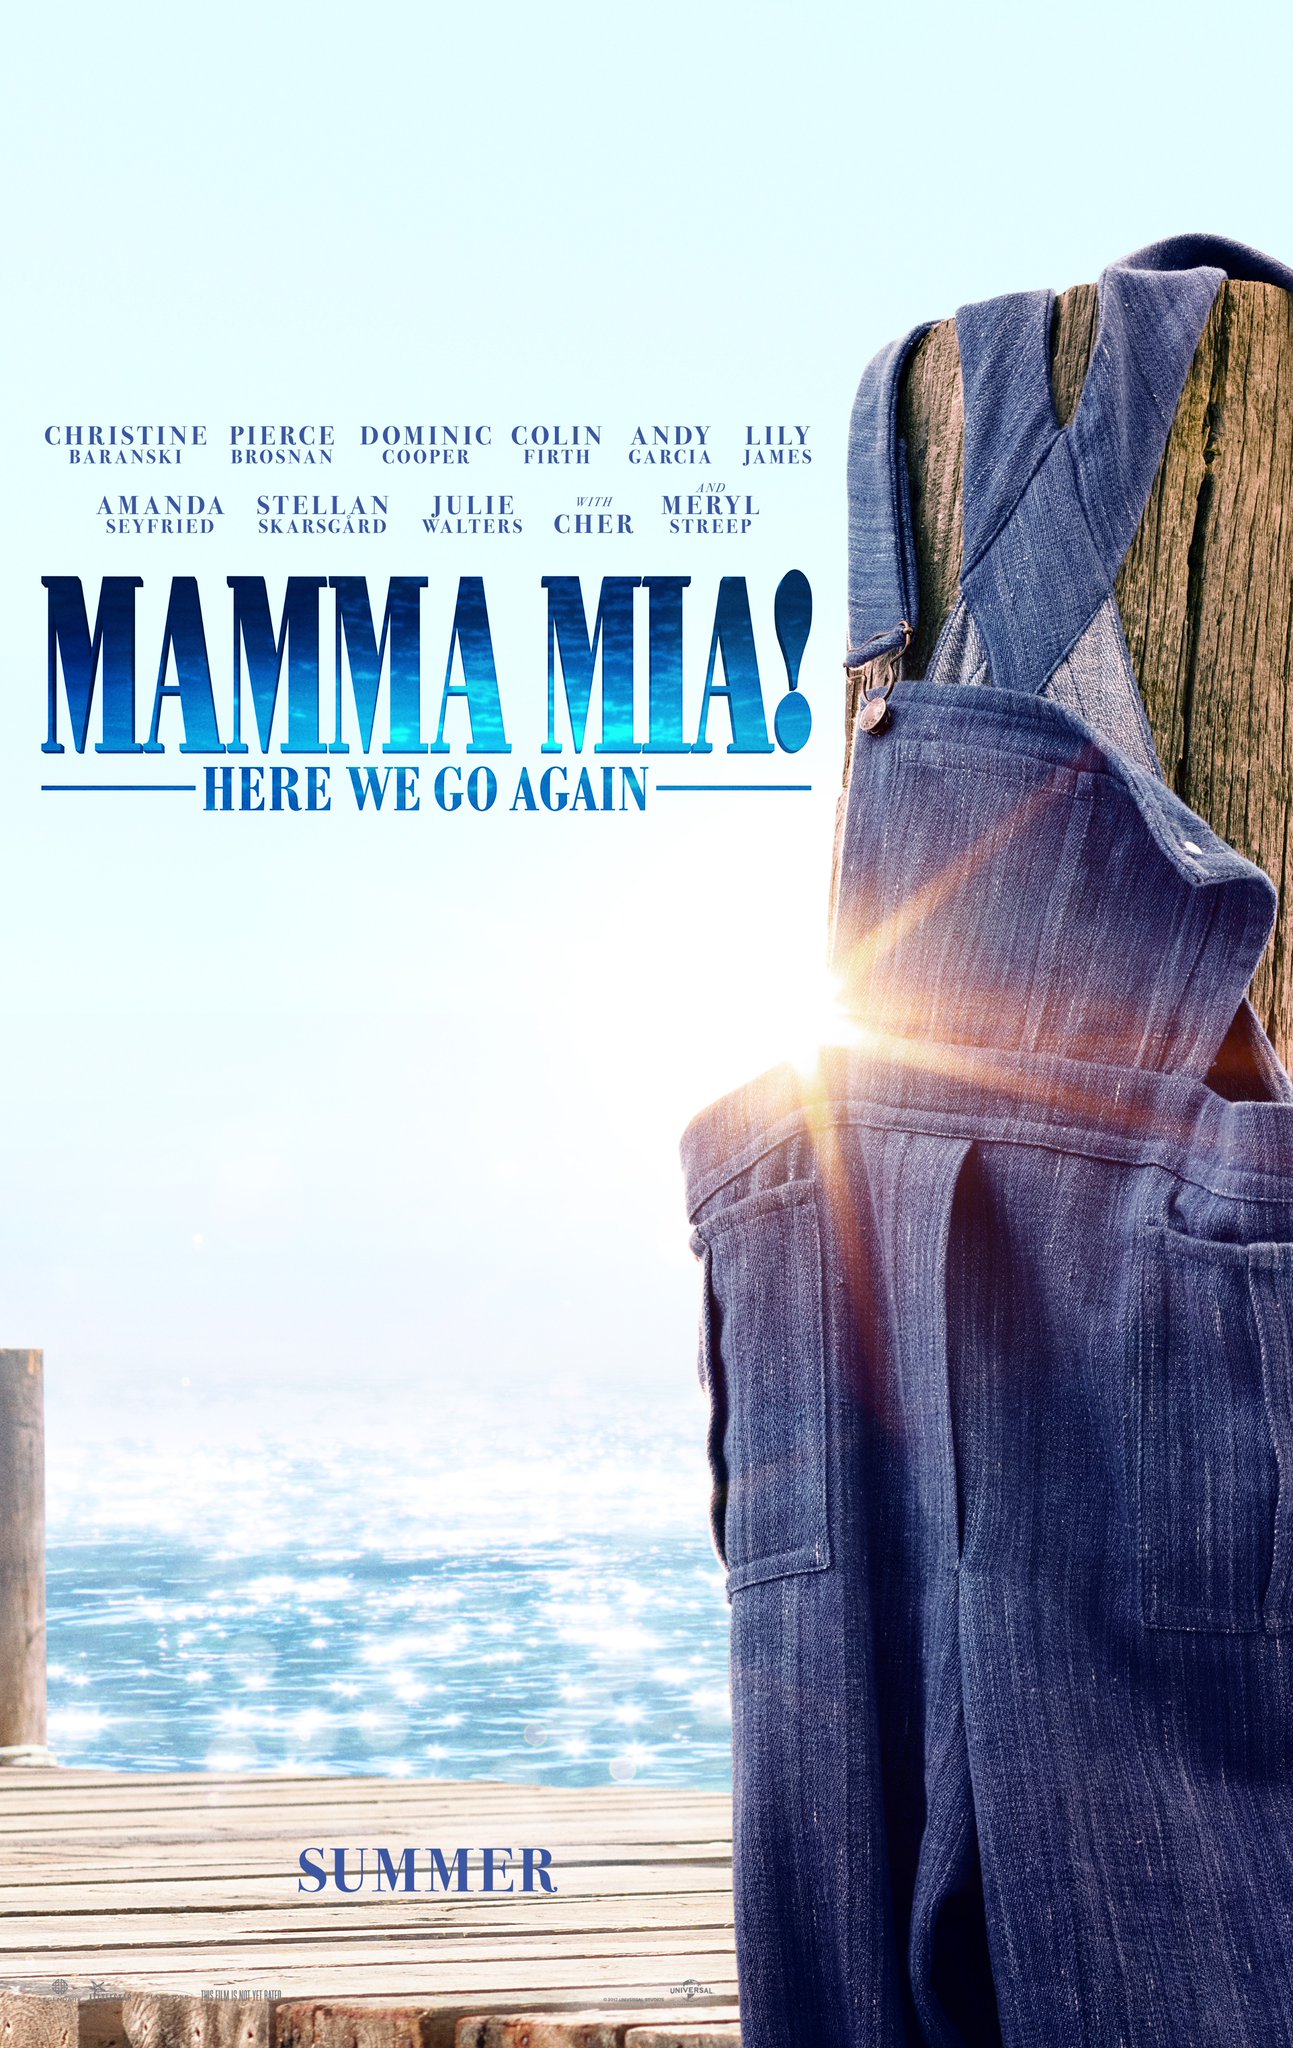 Mamma Mia! Here We Go Again poster (Universal Pictures)